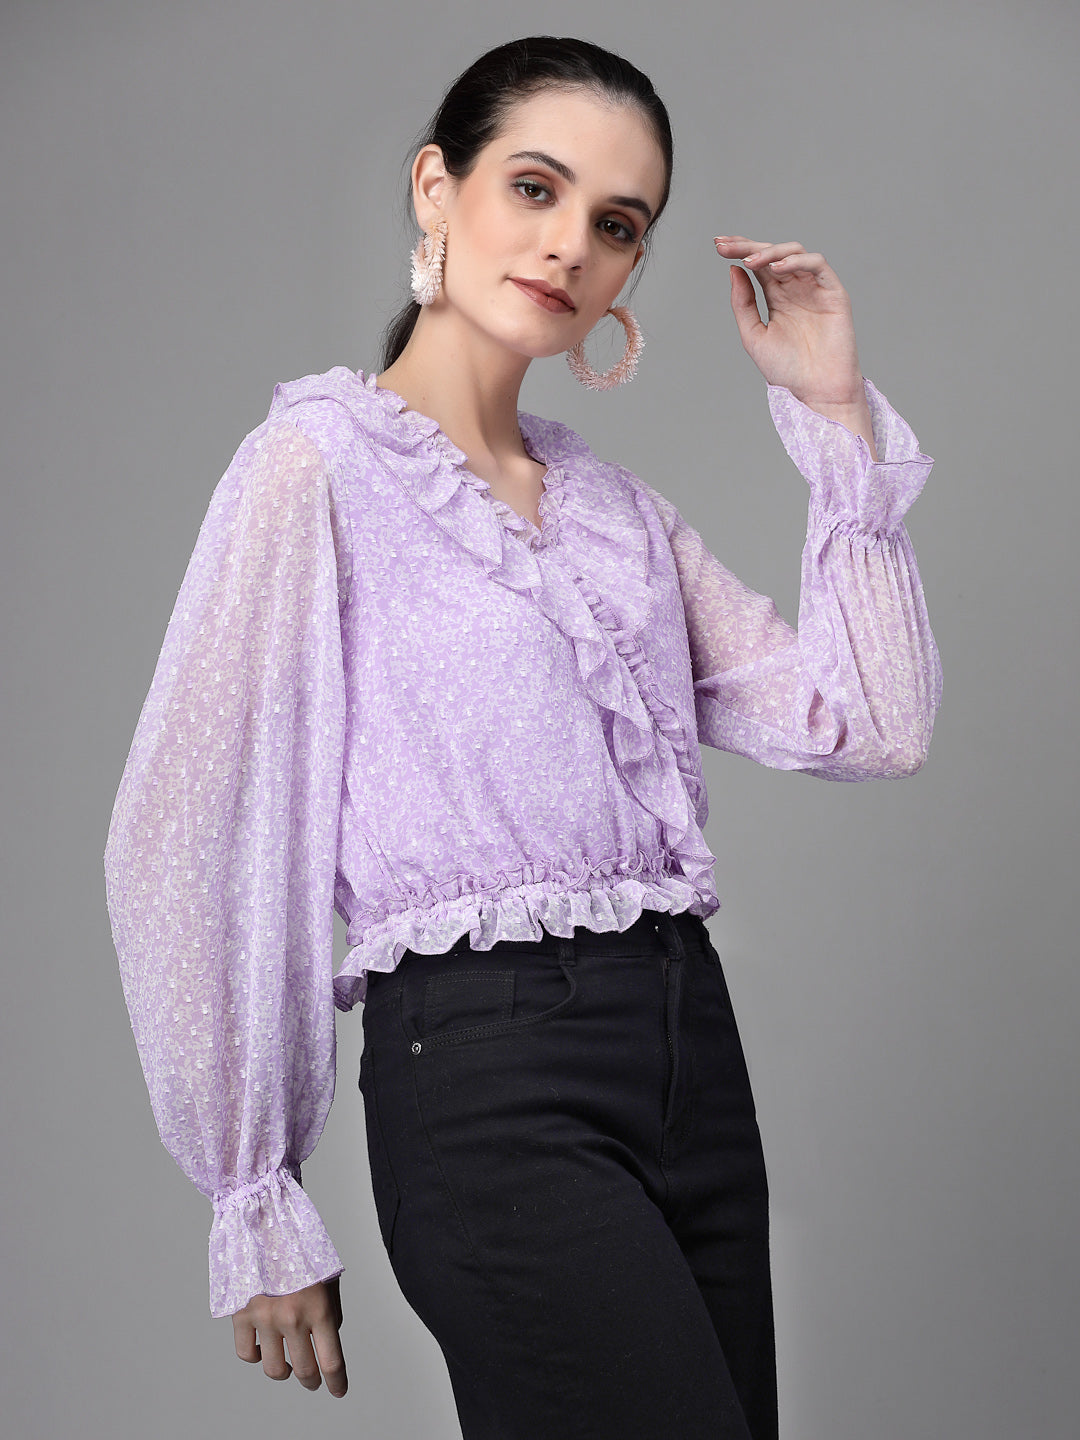 Women Puffed Sleeves V Neck Lilac Blouse Top